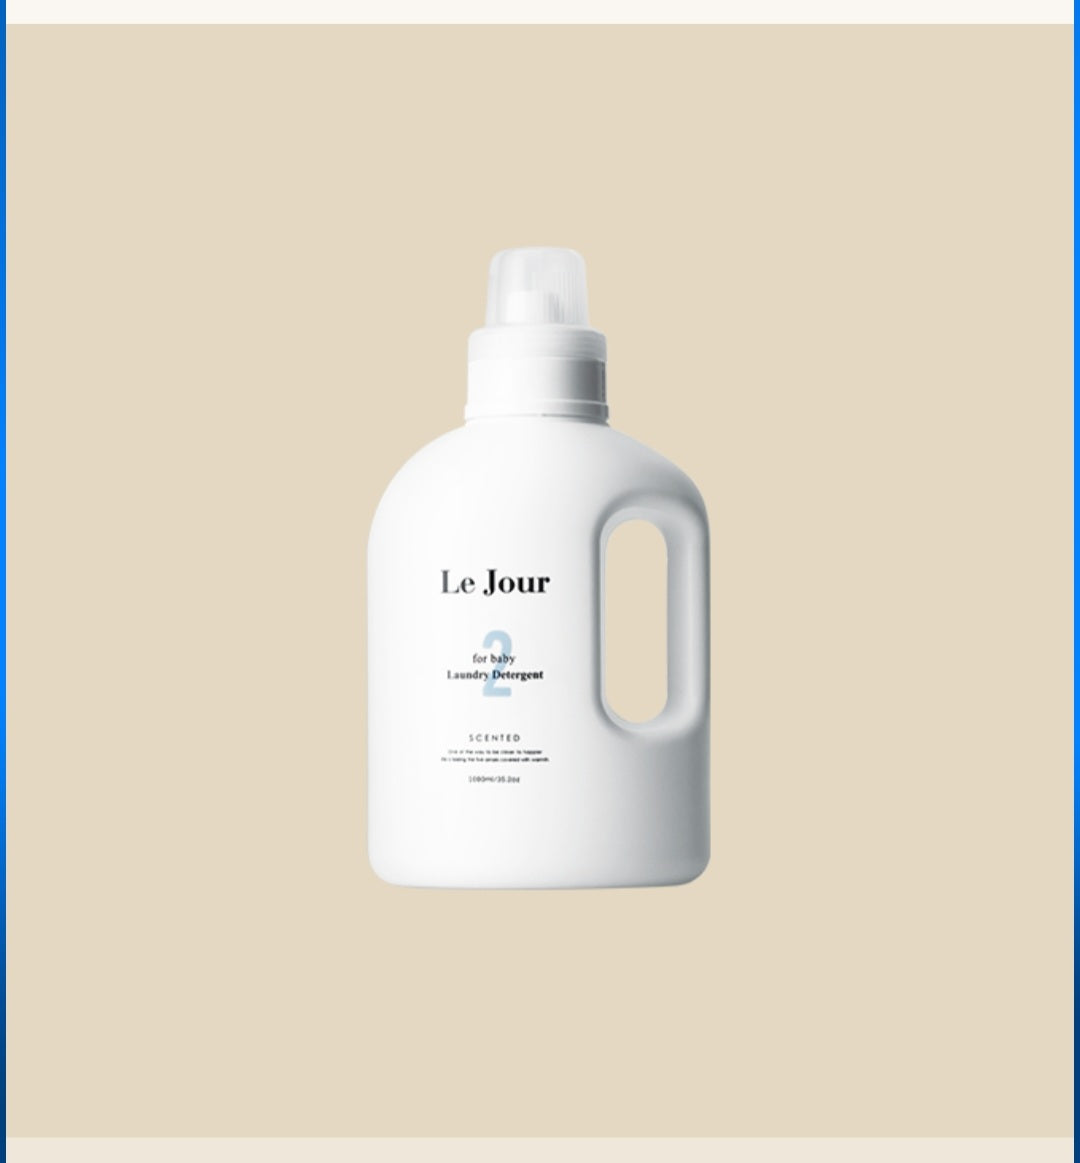 Best ) Le Jour Pure Baby Detergent (French Lavender Scent)